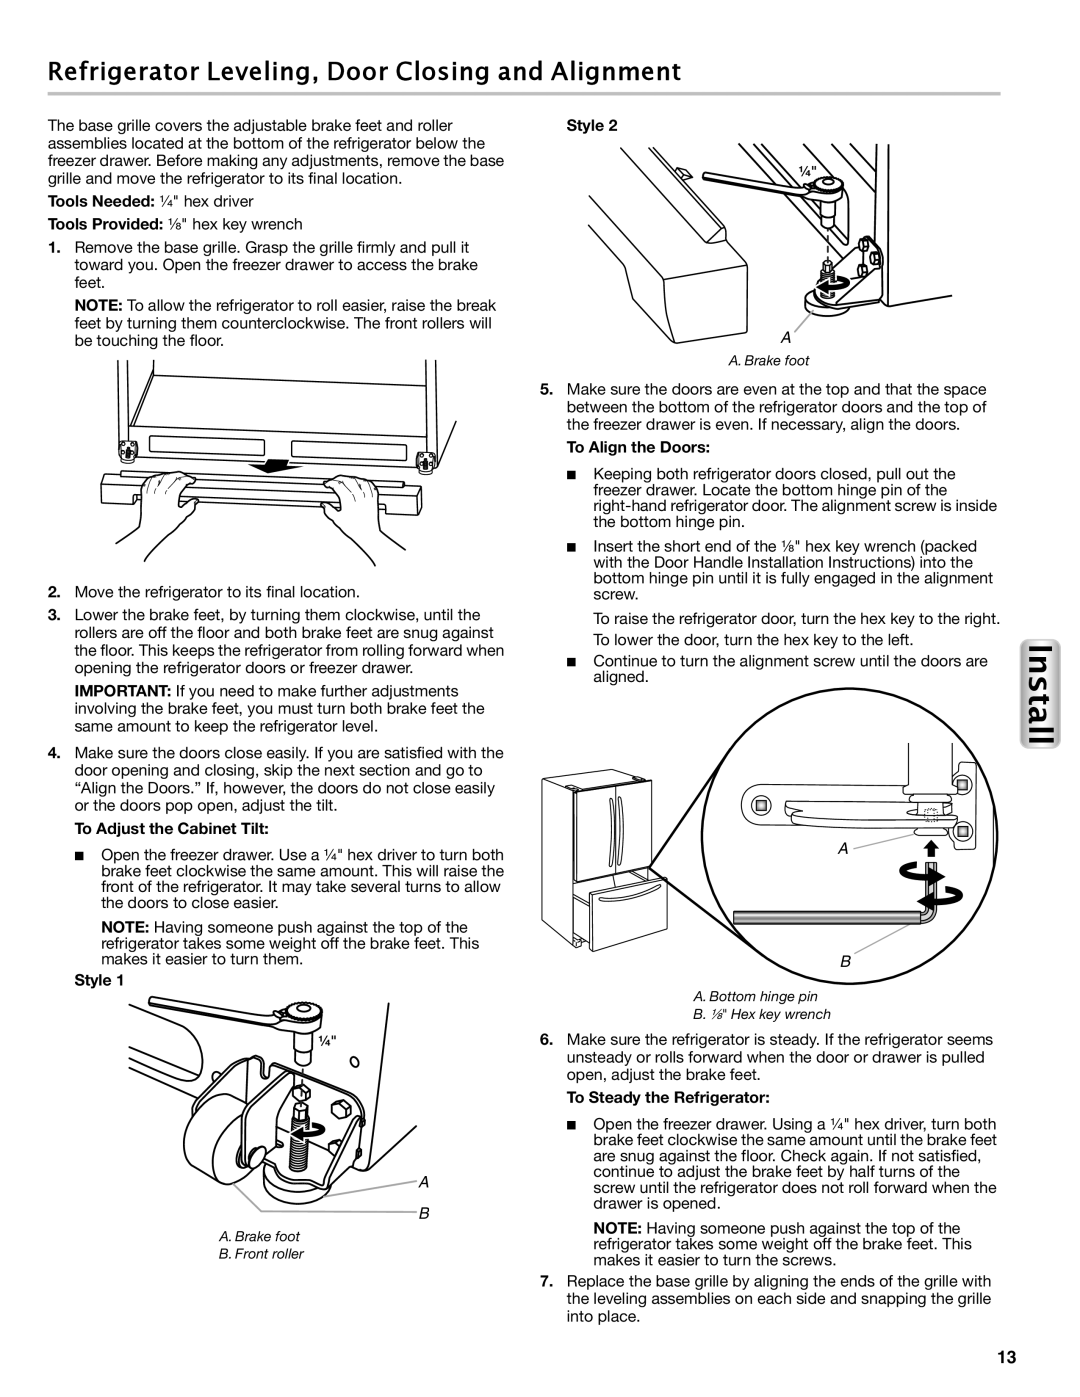 Maytag W10558104A Refrigerator Leveling, Door Closing and Alignment, To Adjust the Cabinet Tilt, Style, To Align the Doors 